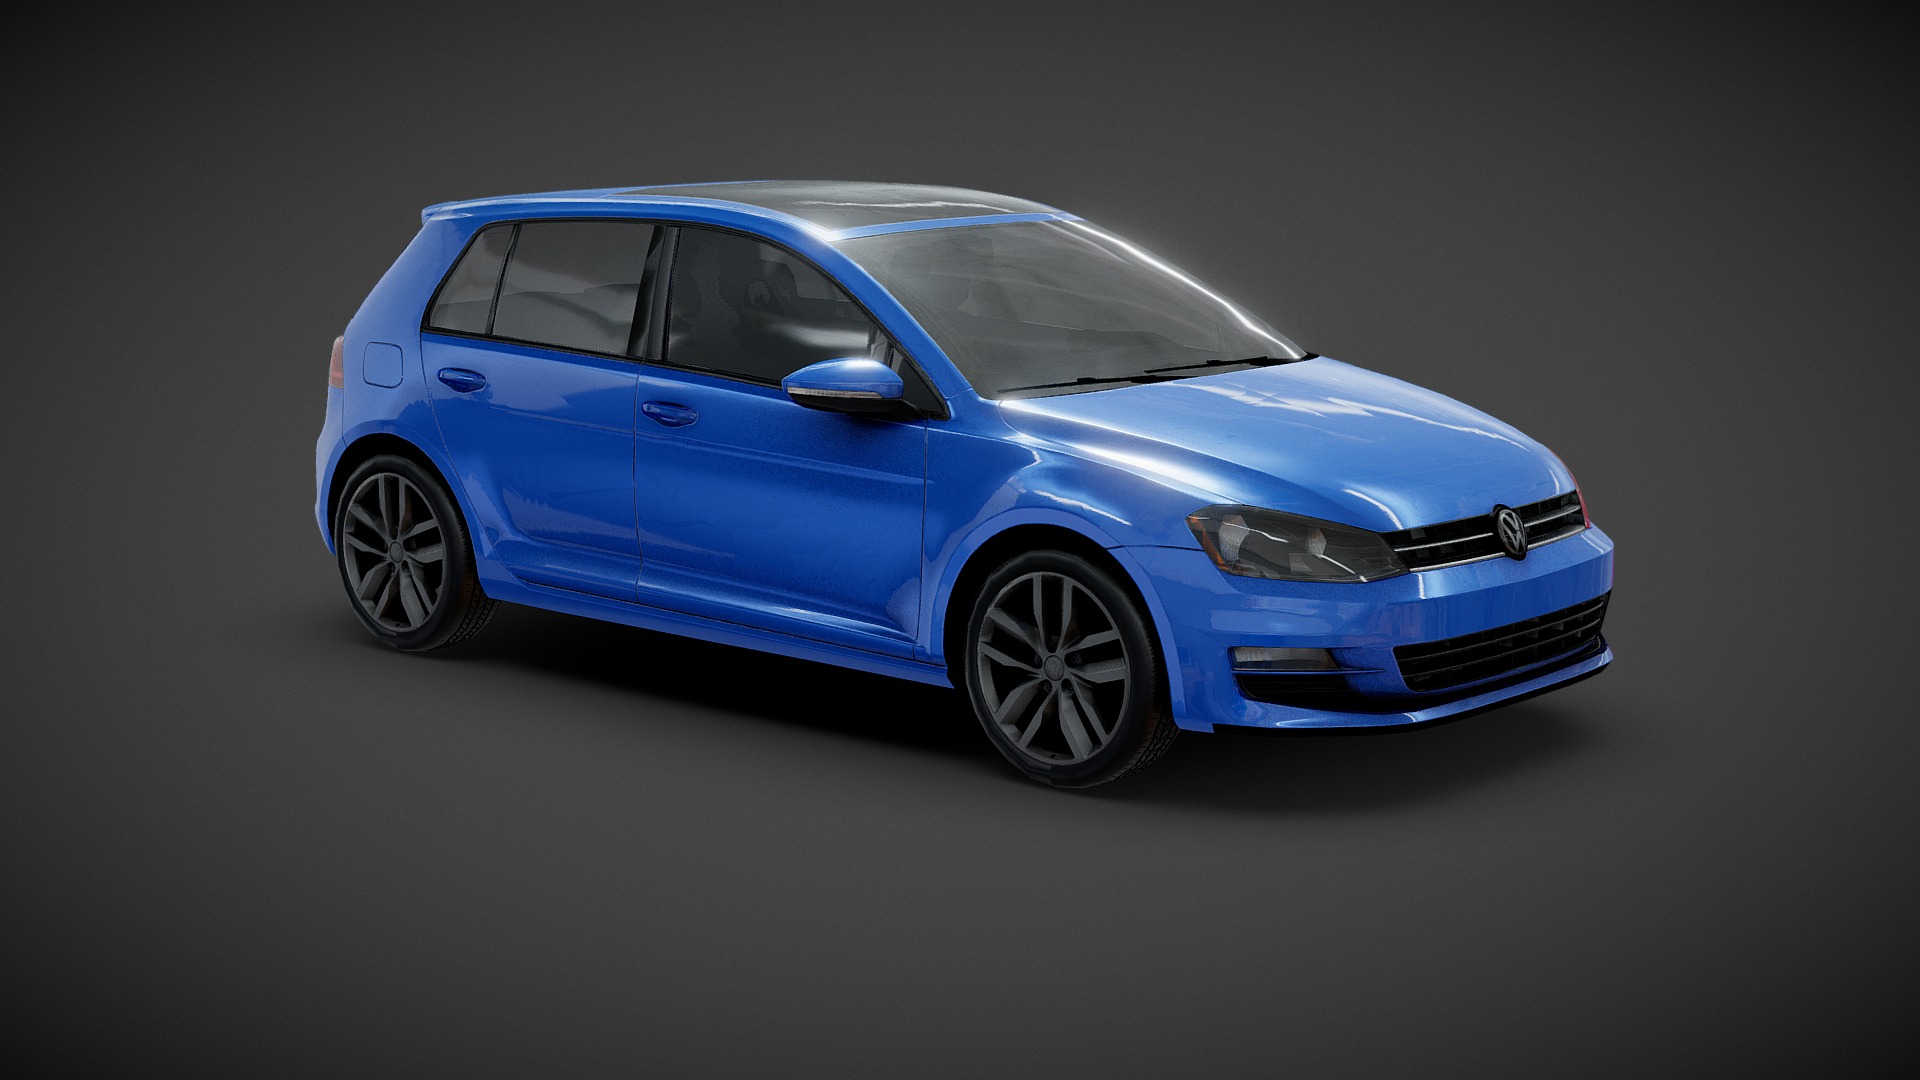 3D model VW Golf Highline Ext Max 2015 - This is a 3D model of the VW Golf Highline Ext Max 2015. The 3D model is about a blue car on a grey background.